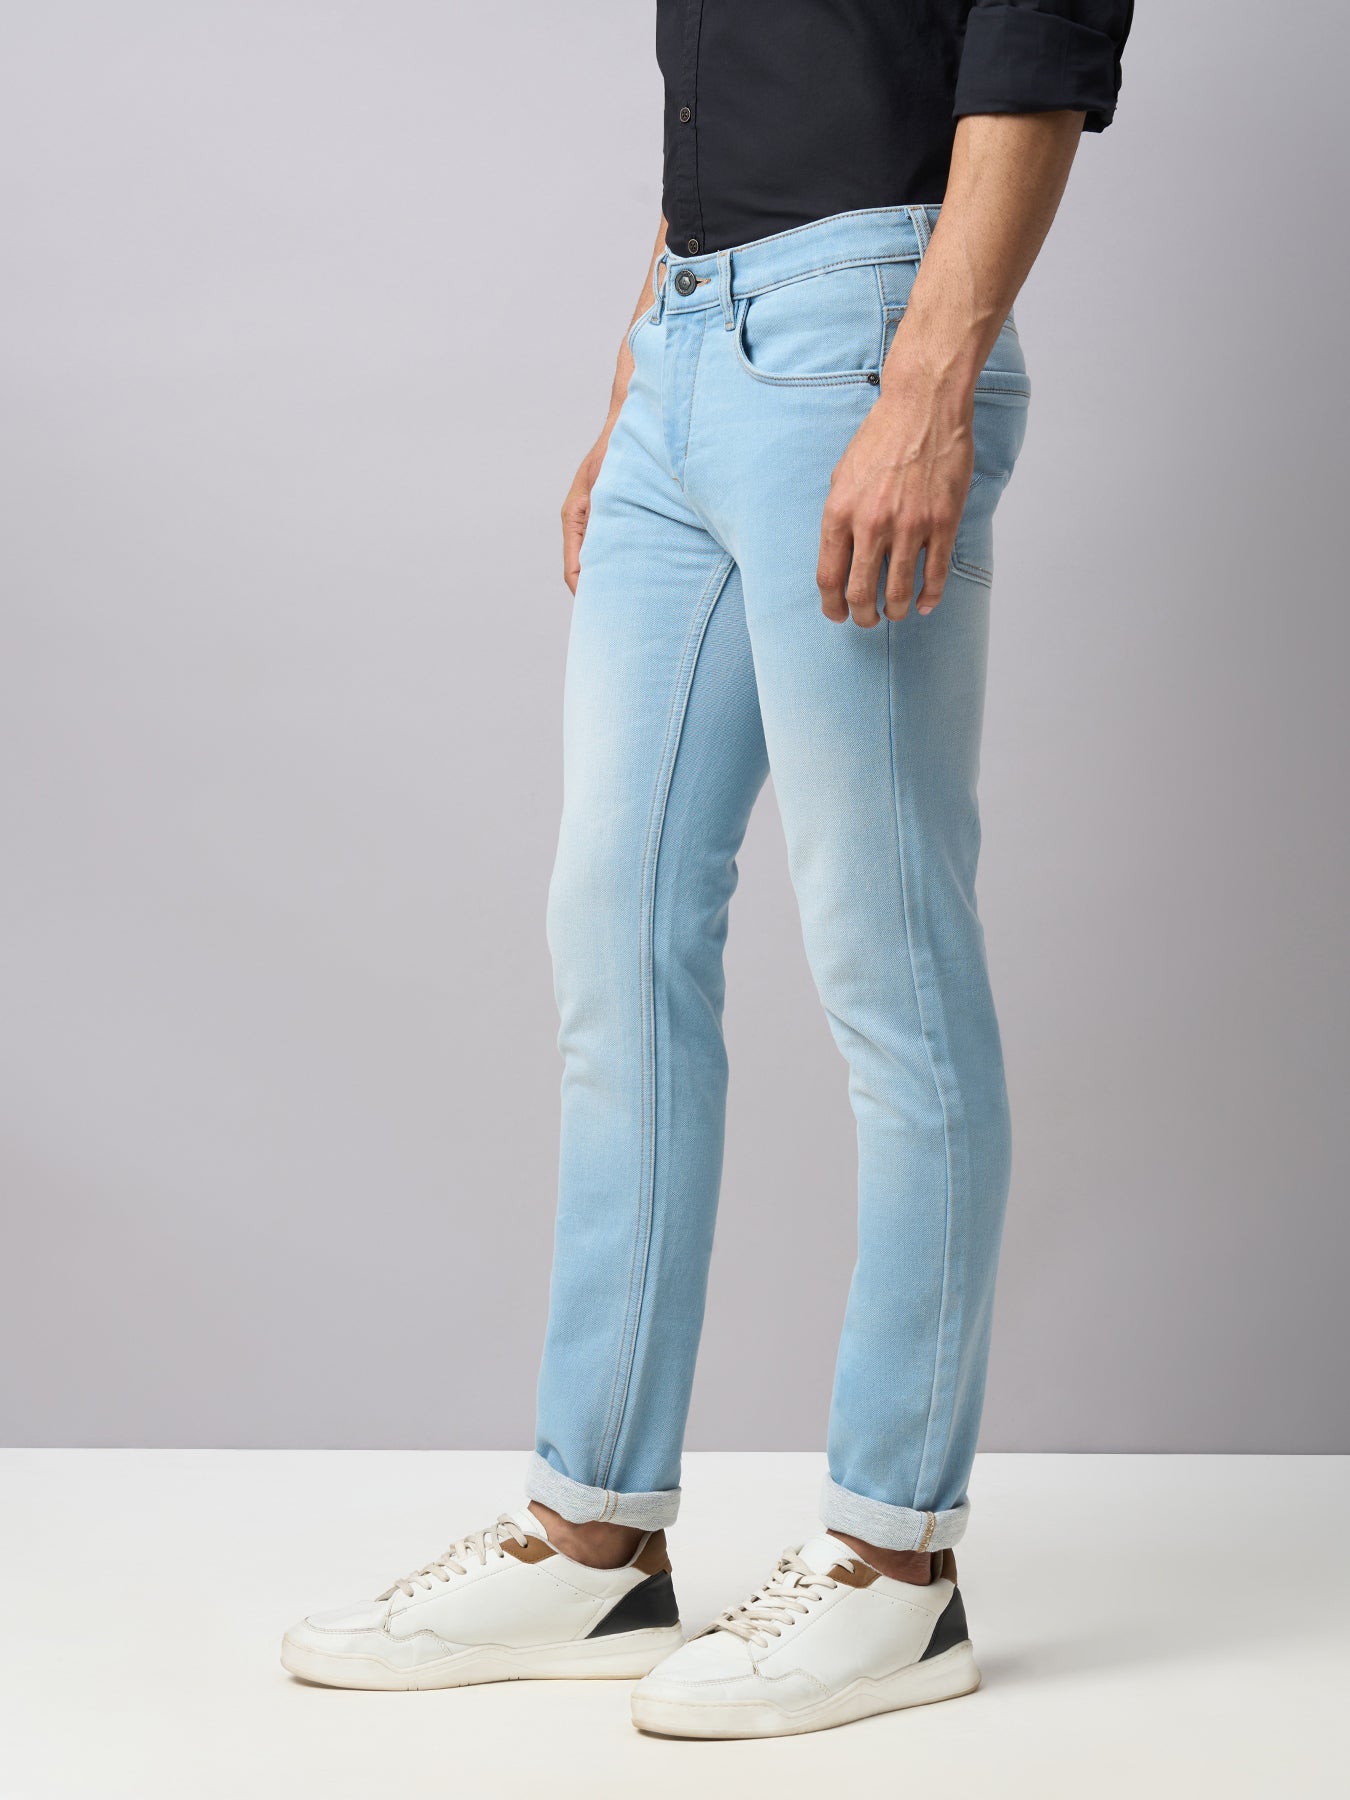 Cotton Stretch Ice Blue Plain Narrow Fit Flat Front Casual Jeans